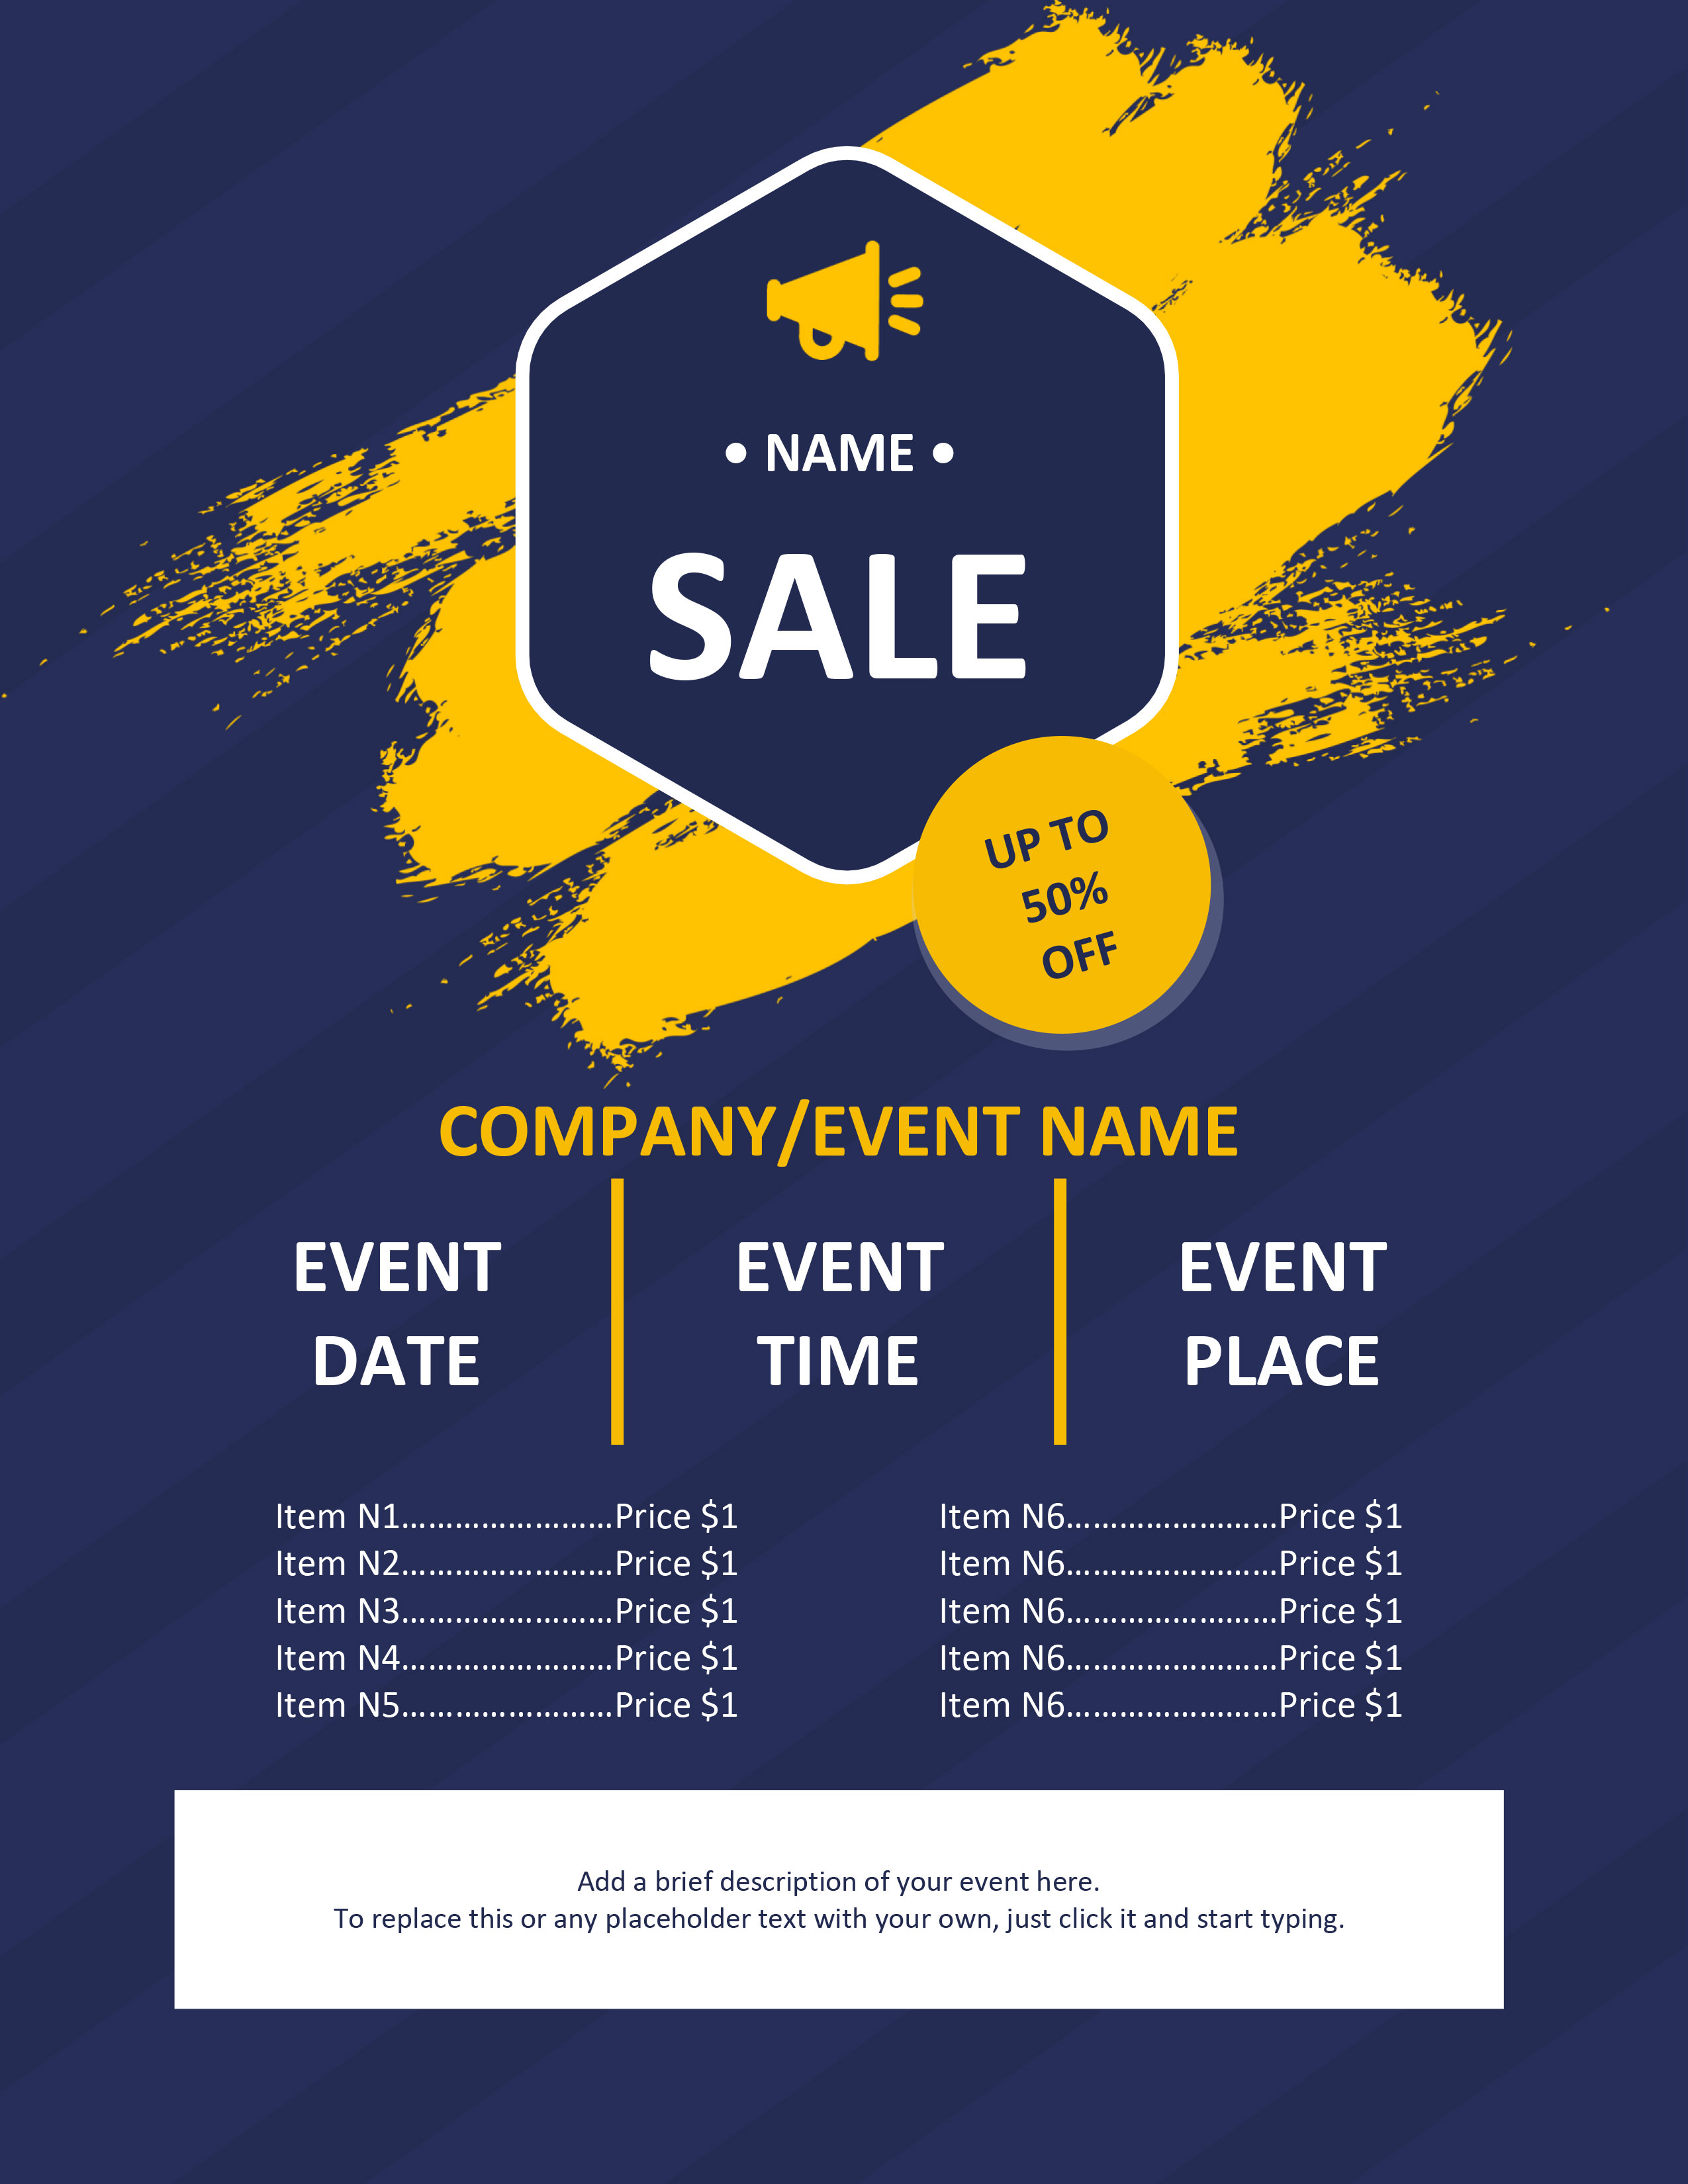 free-downloadable-templates-for-flyers-sellingfad